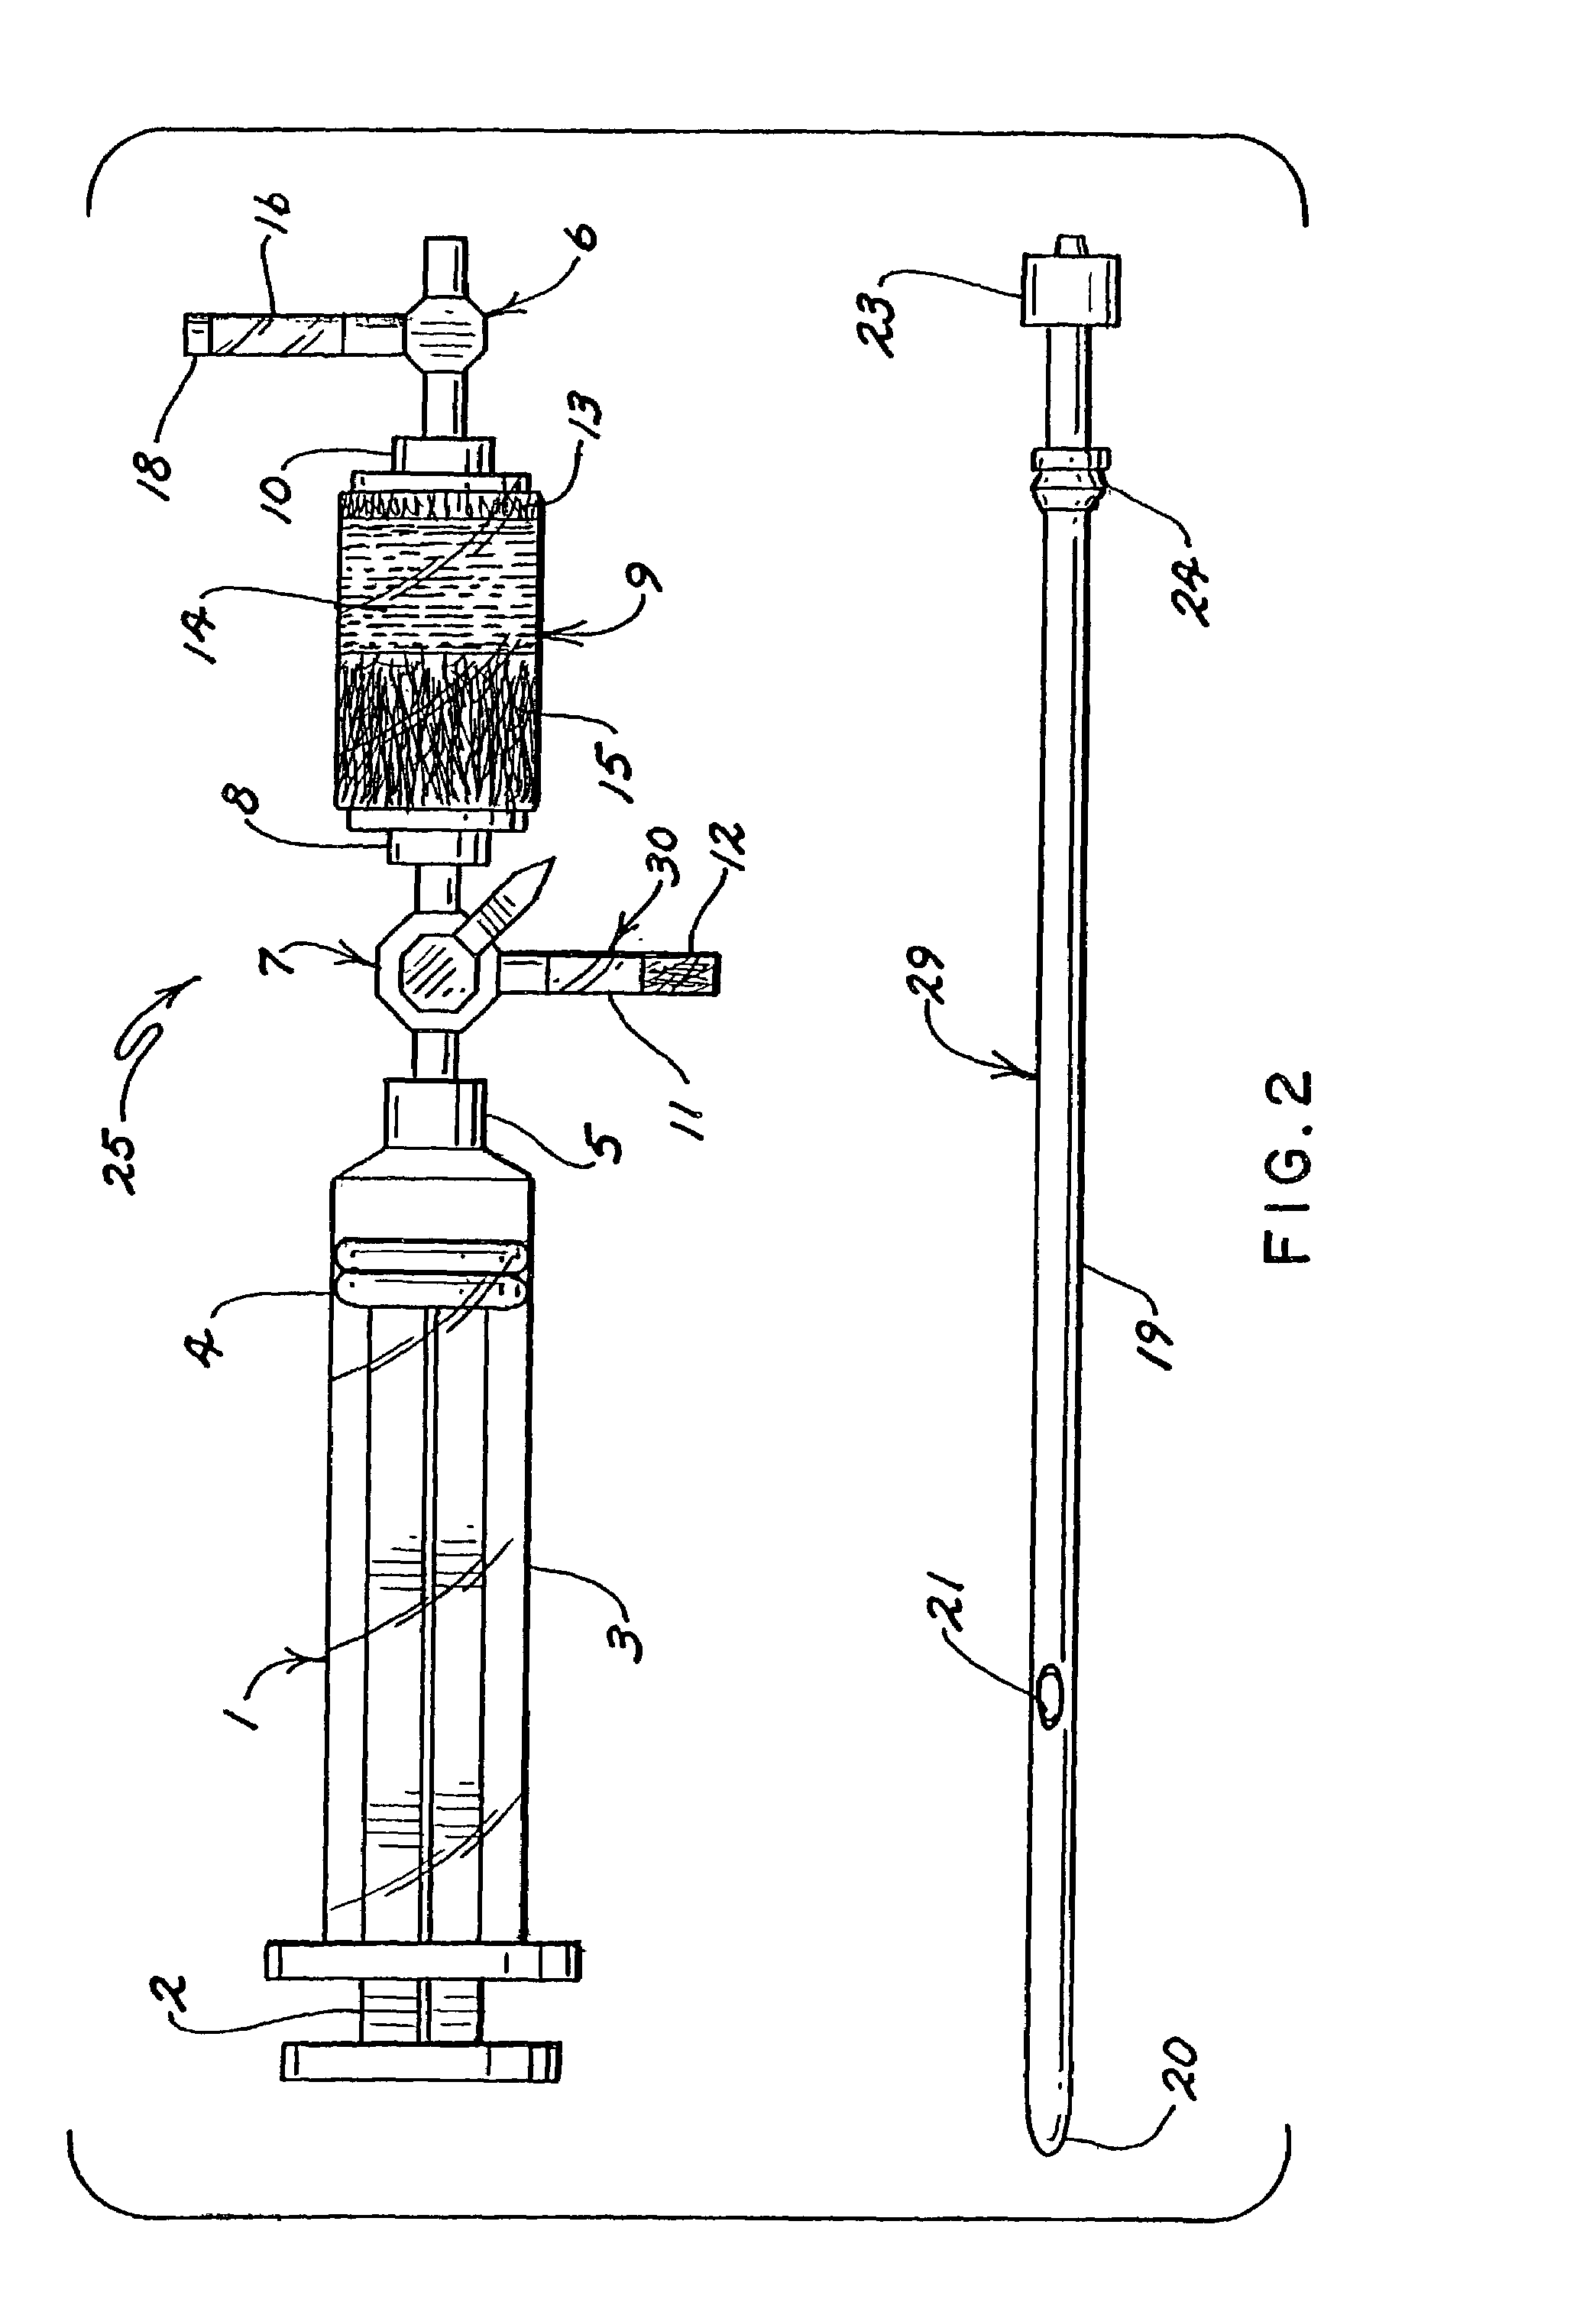 Clotting cascade initiating apparatus and methods of use and methods of closing wounds